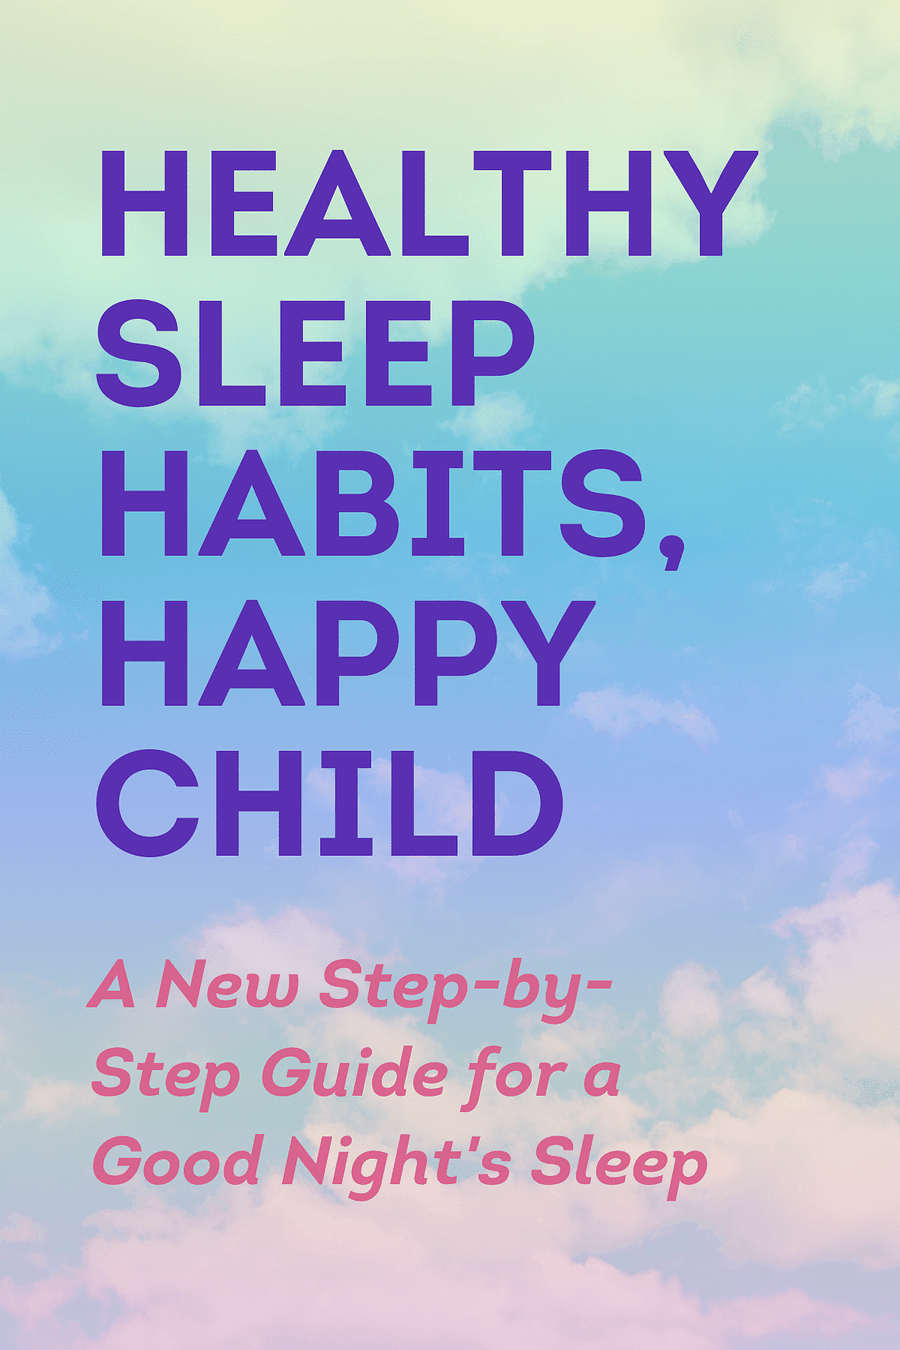 Healthy Sleep Habits, Happy Child, 5th Edition by Dr. Marc Weissbluth MD - Book Summary